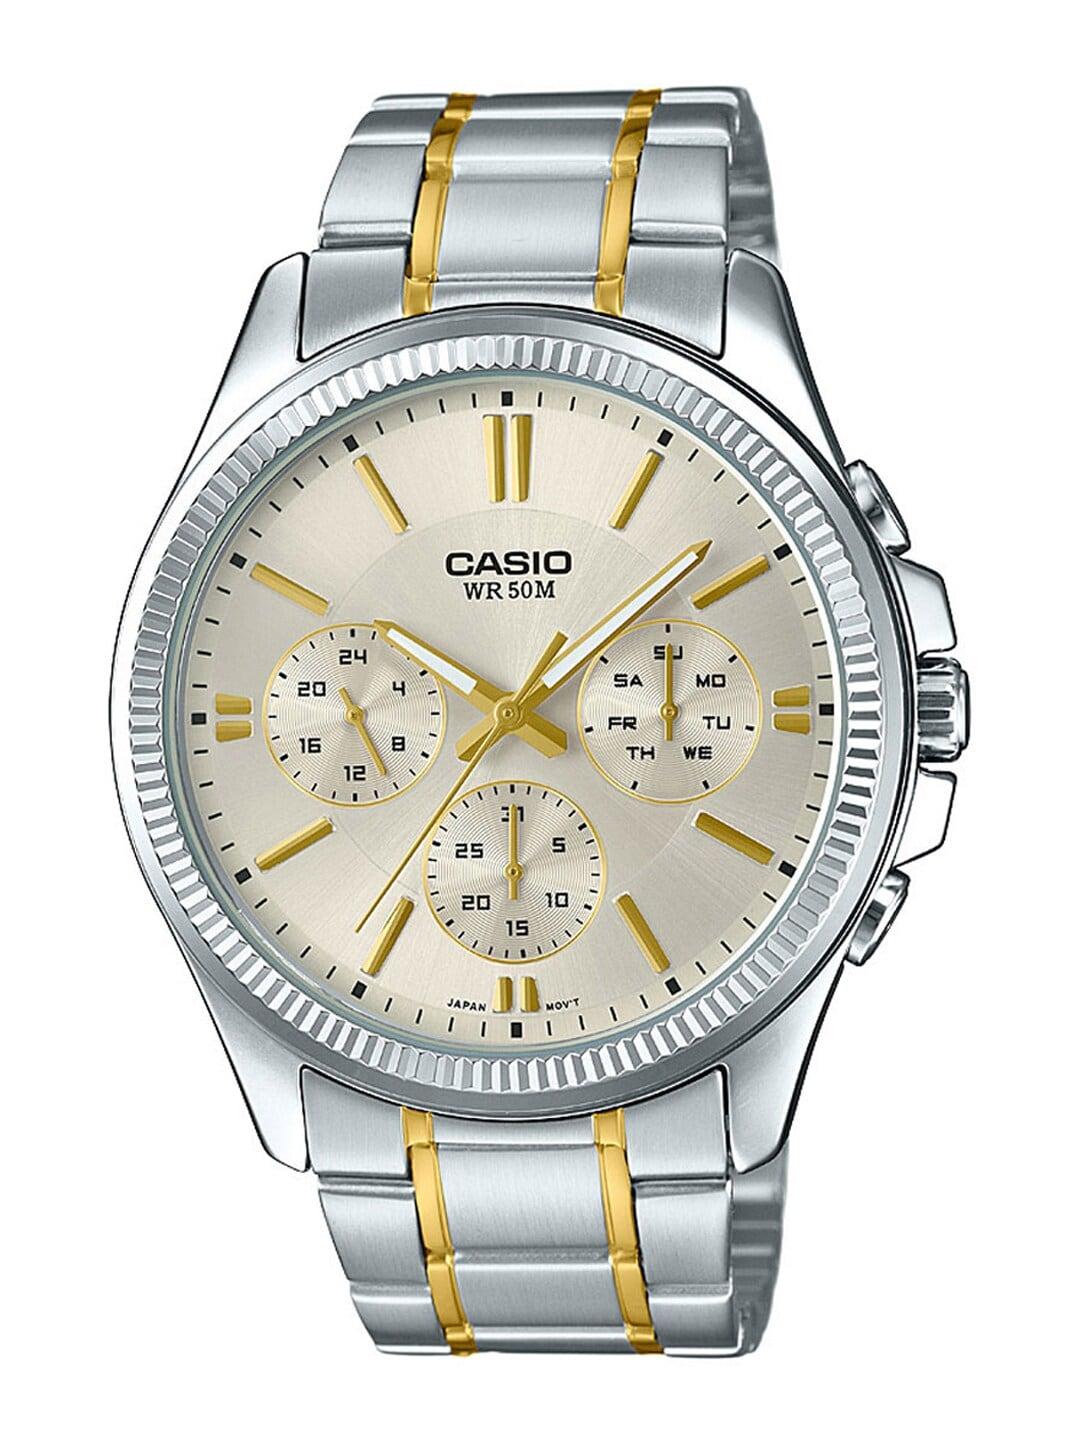 CASIO Enticer Men Silver-Toned Analogue Watch A1657 MTP-1375HSG-9AVIF